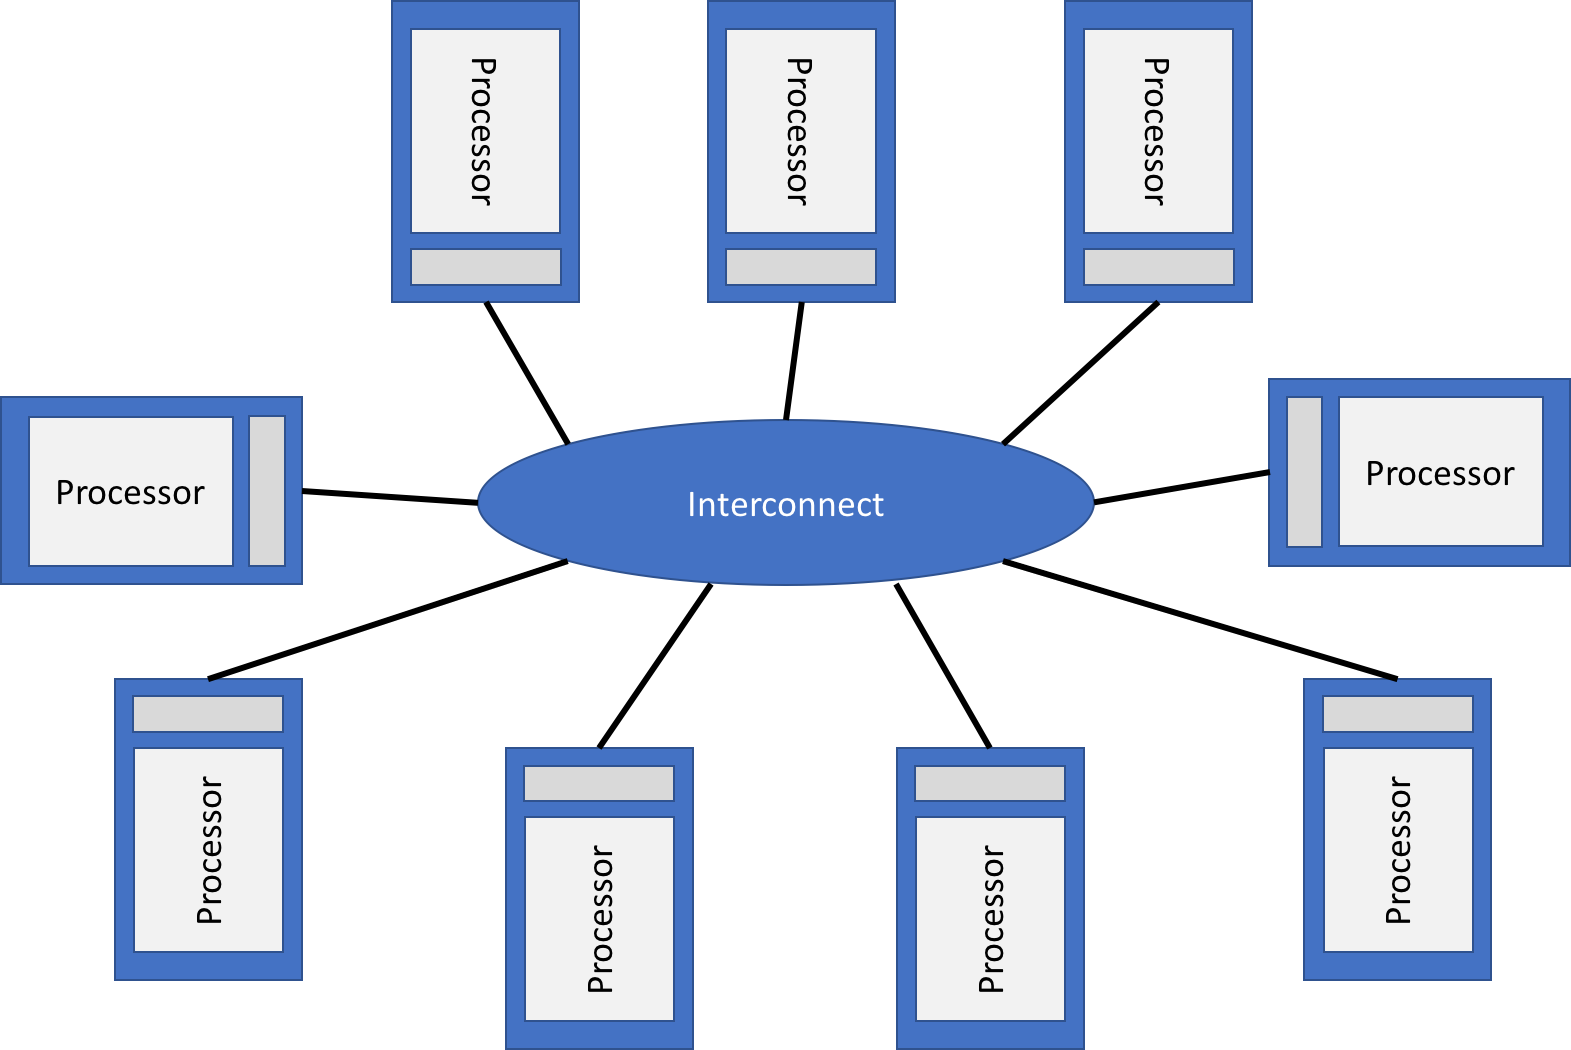 Distributed memory architecture